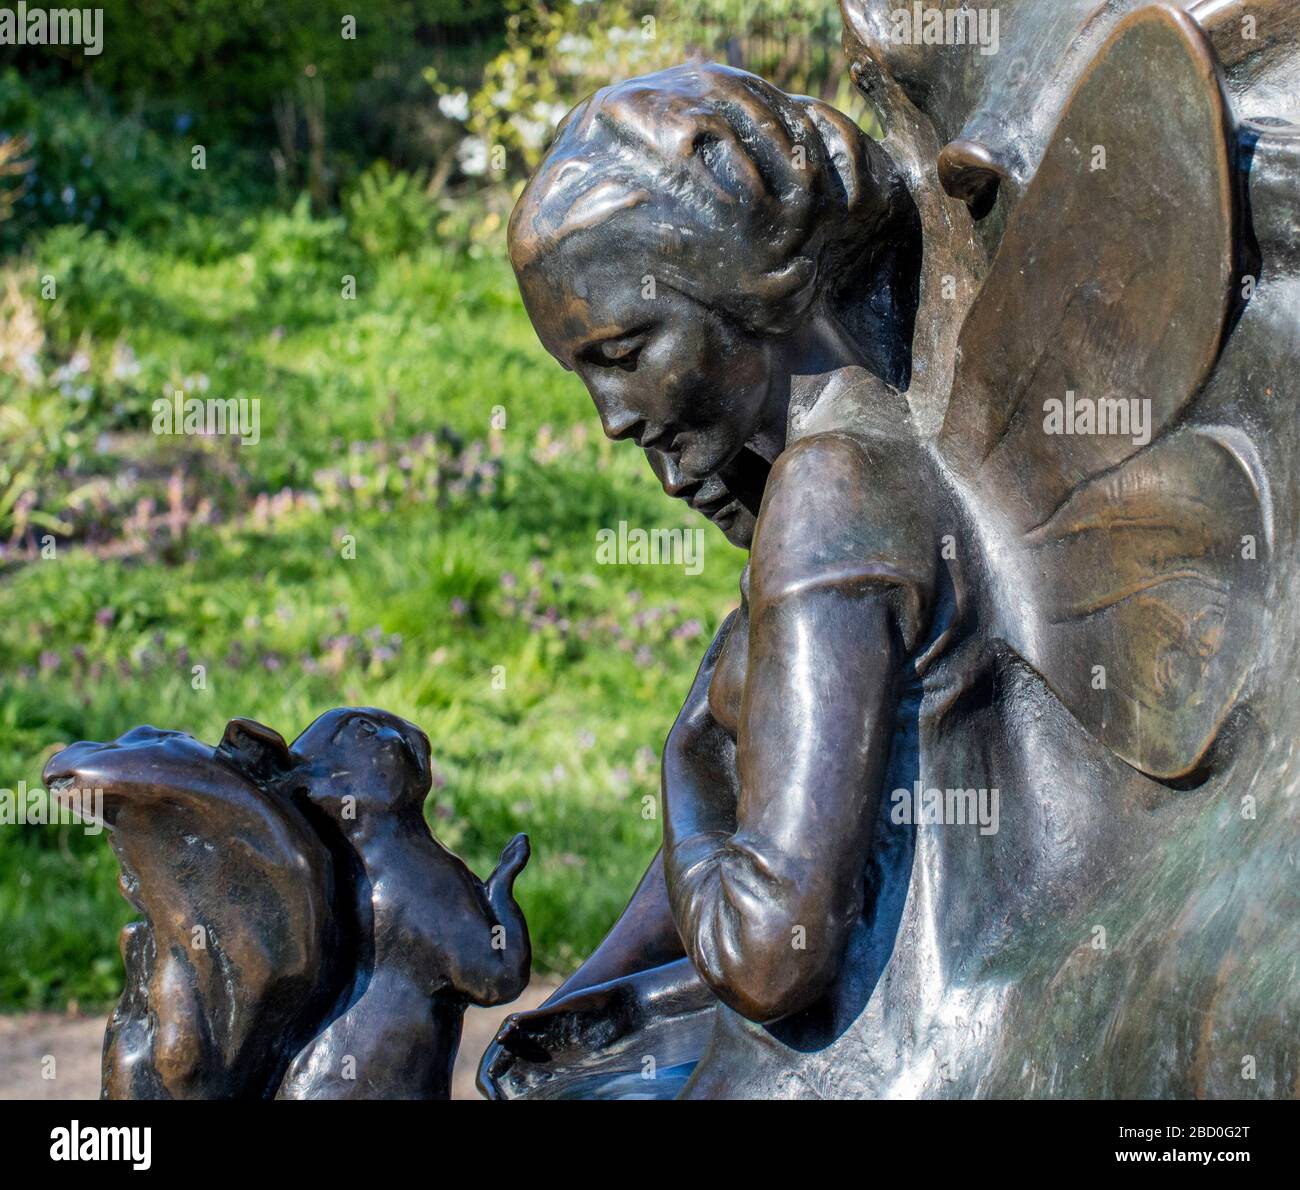 Peter Pan statue in Kensington Gardens, sculpted in bronze in 1912 by Sir George Frampton, showing detail of fairies who live in the Gardens. Stock Photo